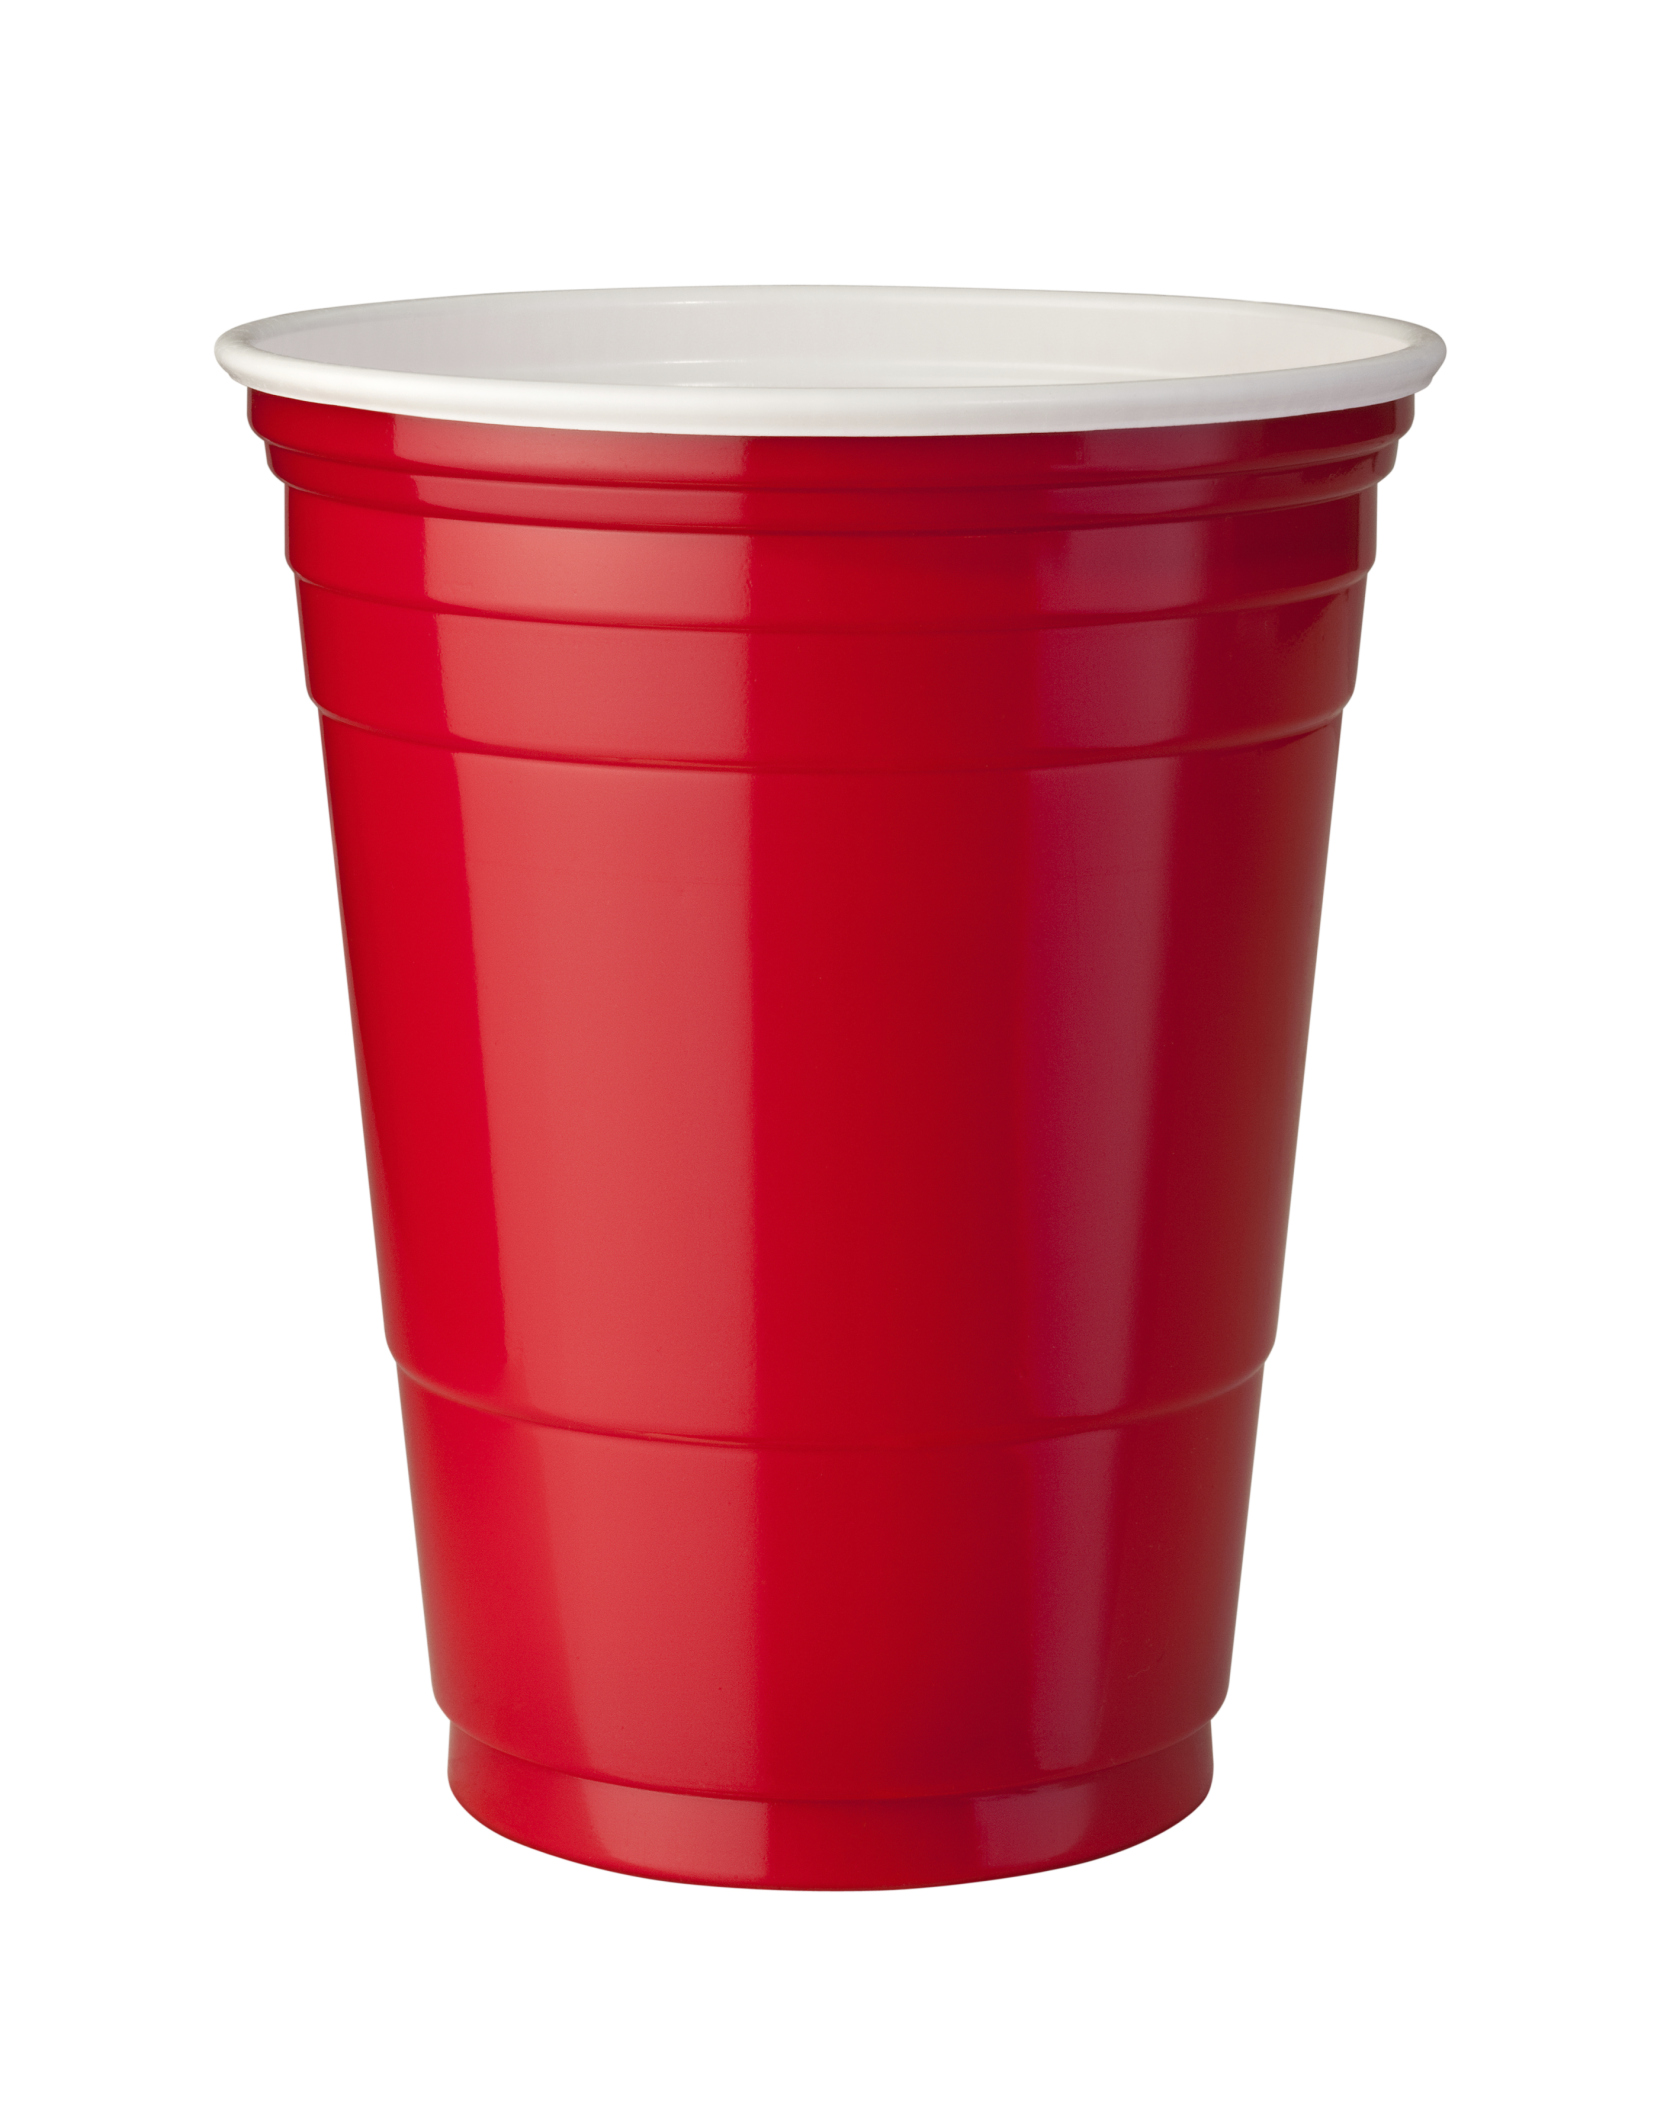 red-solo-cup-blank-template-imgflip